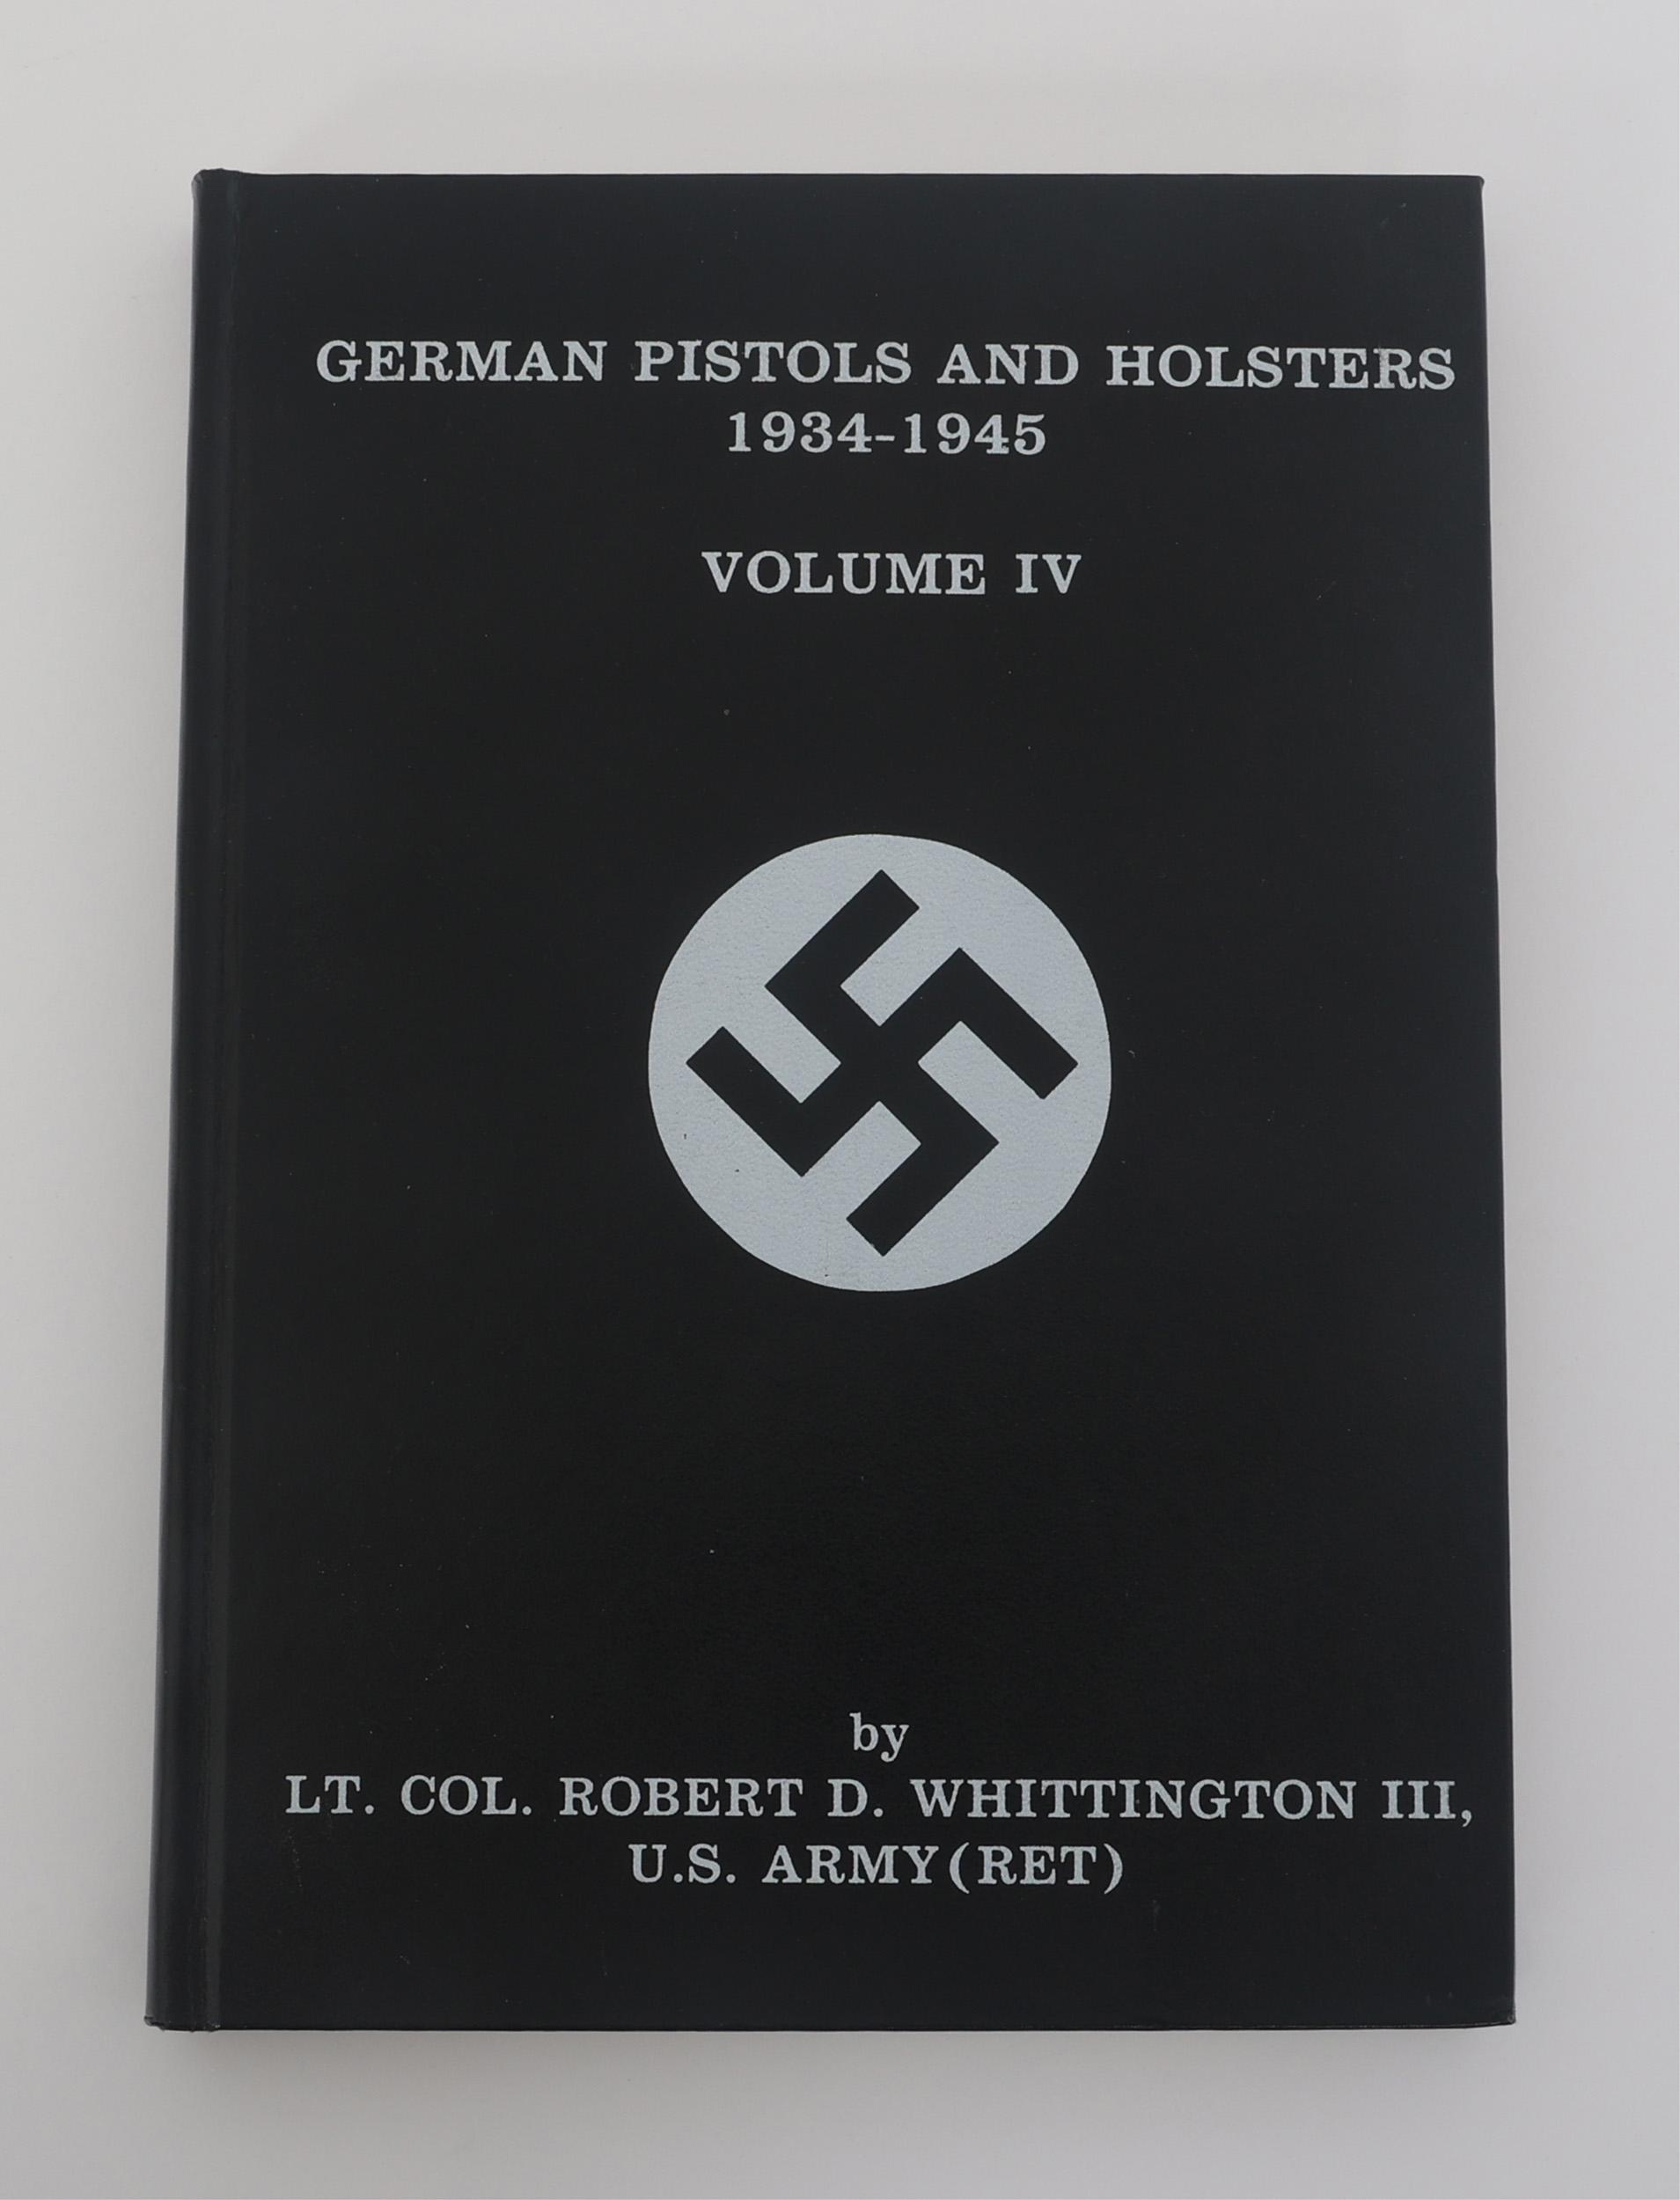 GERMAN PISTOLS AND HOLSTERS REFERENCE BOOKS